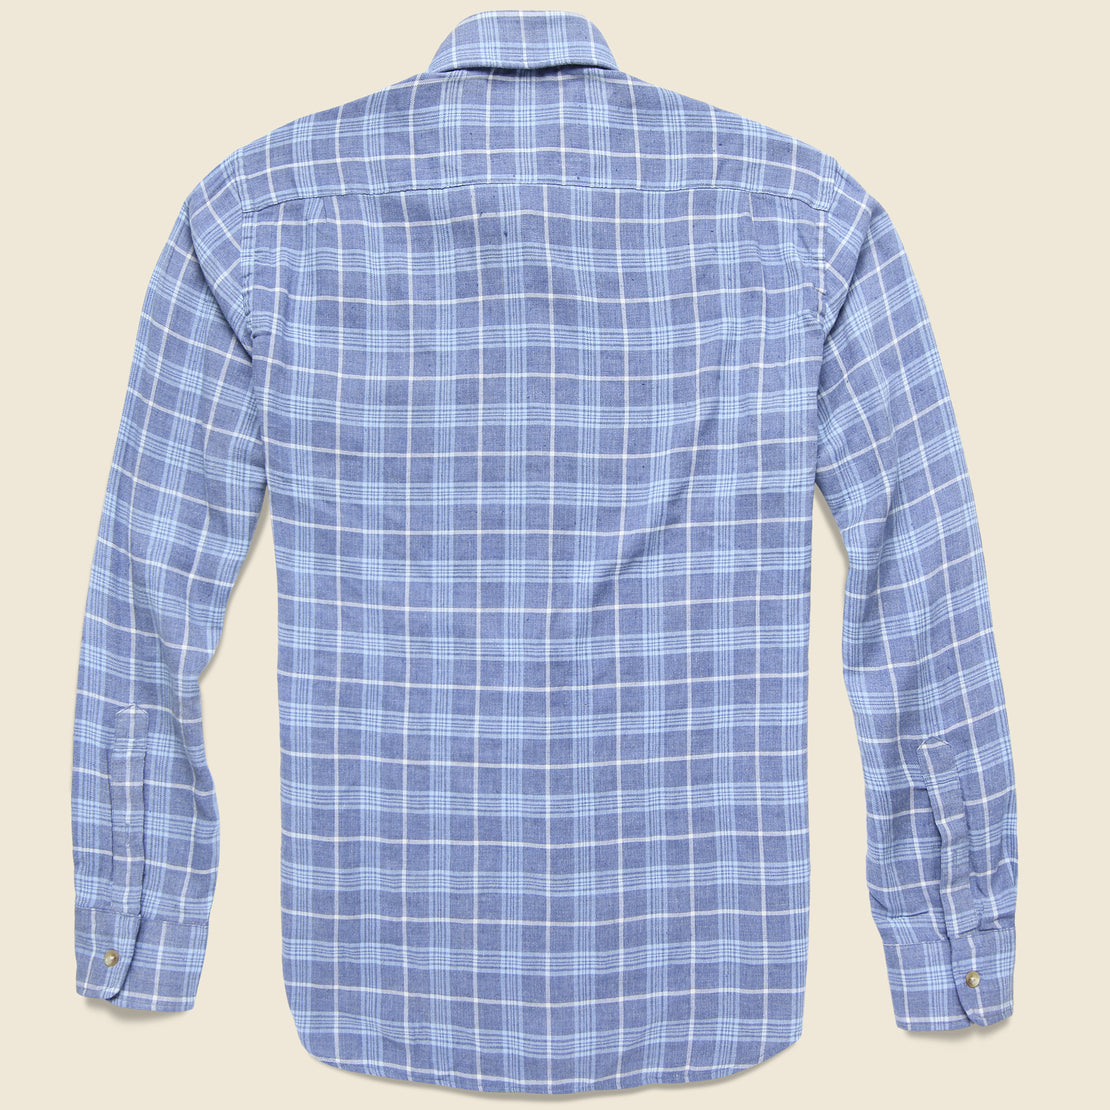 Pacific Shirt - Light Blue Melange - Faherty - STAG Provisions - Tops - L/S Woven - Plaid